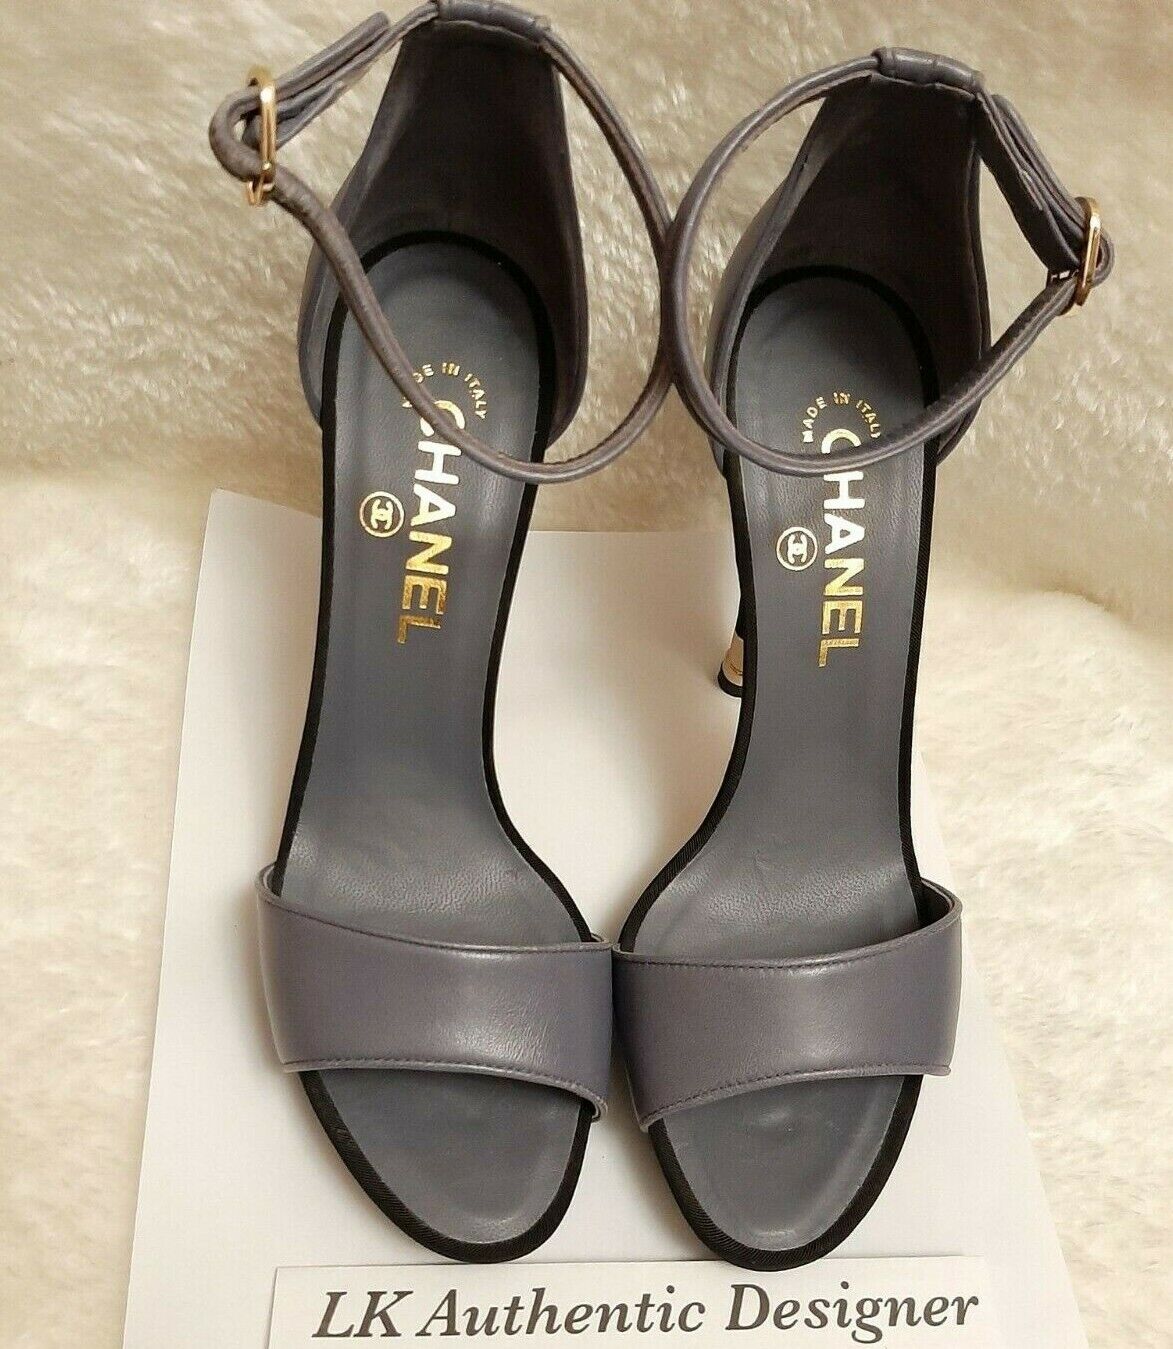 Chanel Ladies Leather High Heels Party Sandals/Shoes in Grey Size 38 ~  Pre-loved | eBay